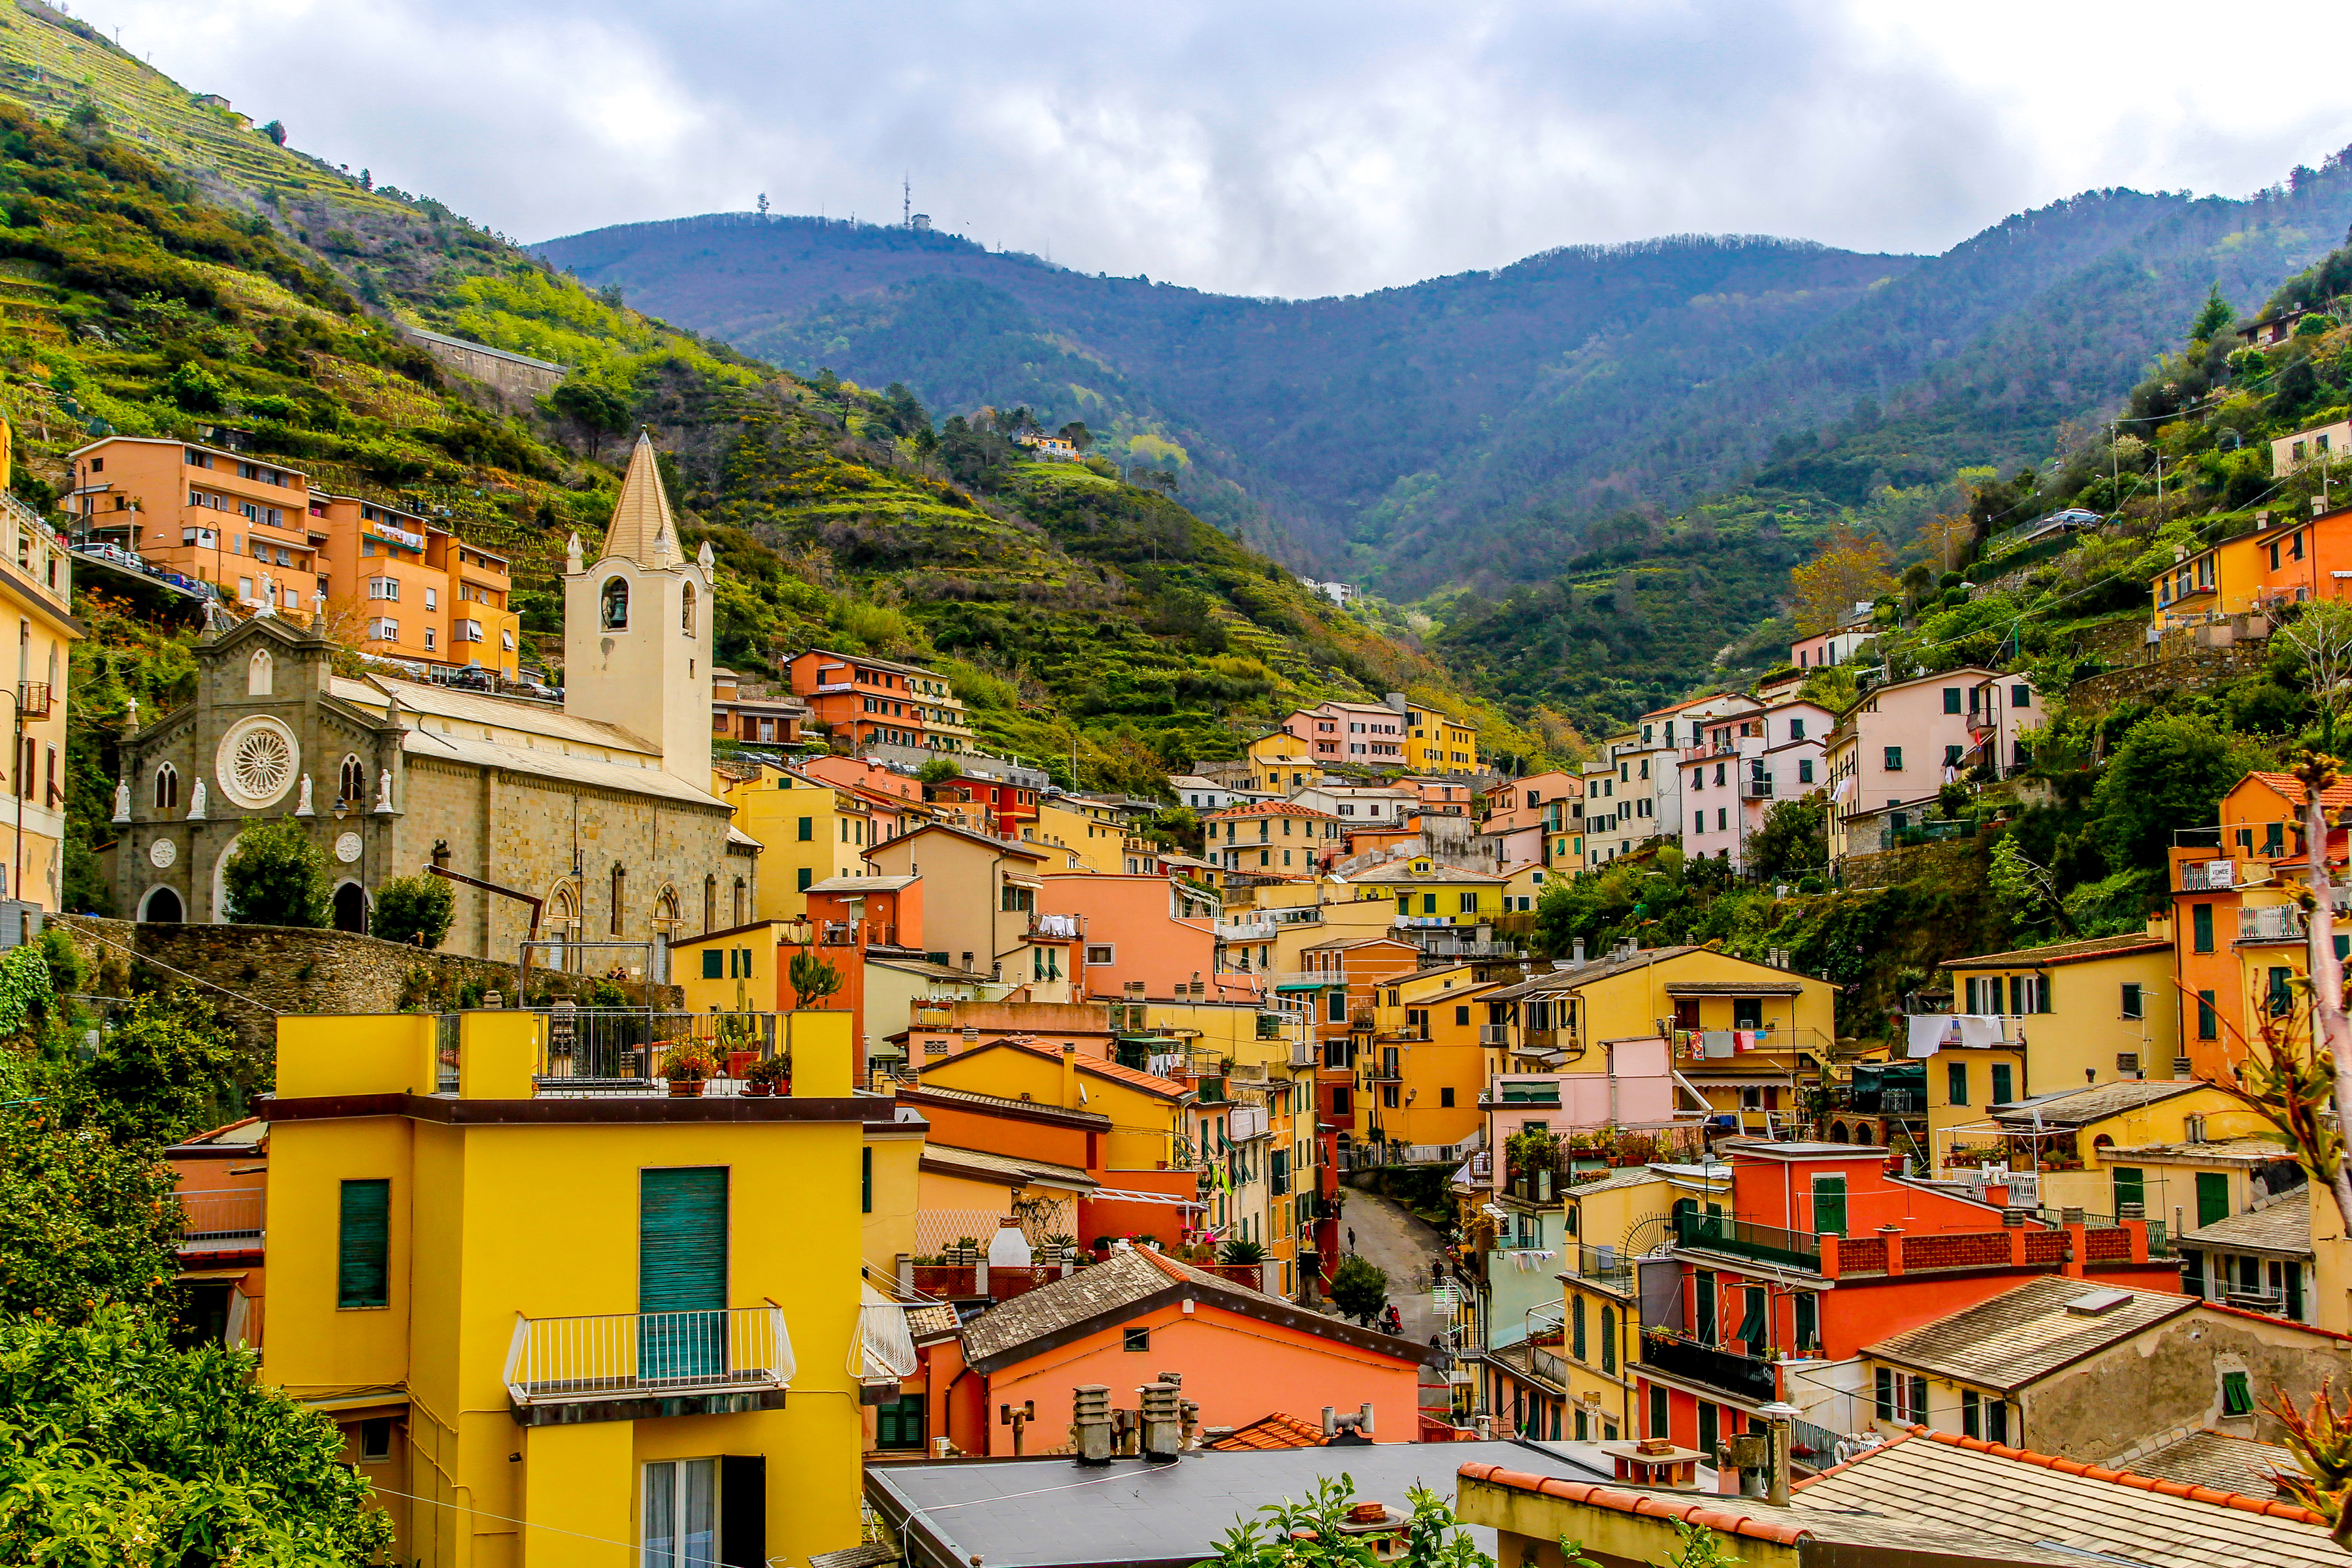 italy, man made, manarola, cinque terre, colorful, colors, house, mountain, village, towns